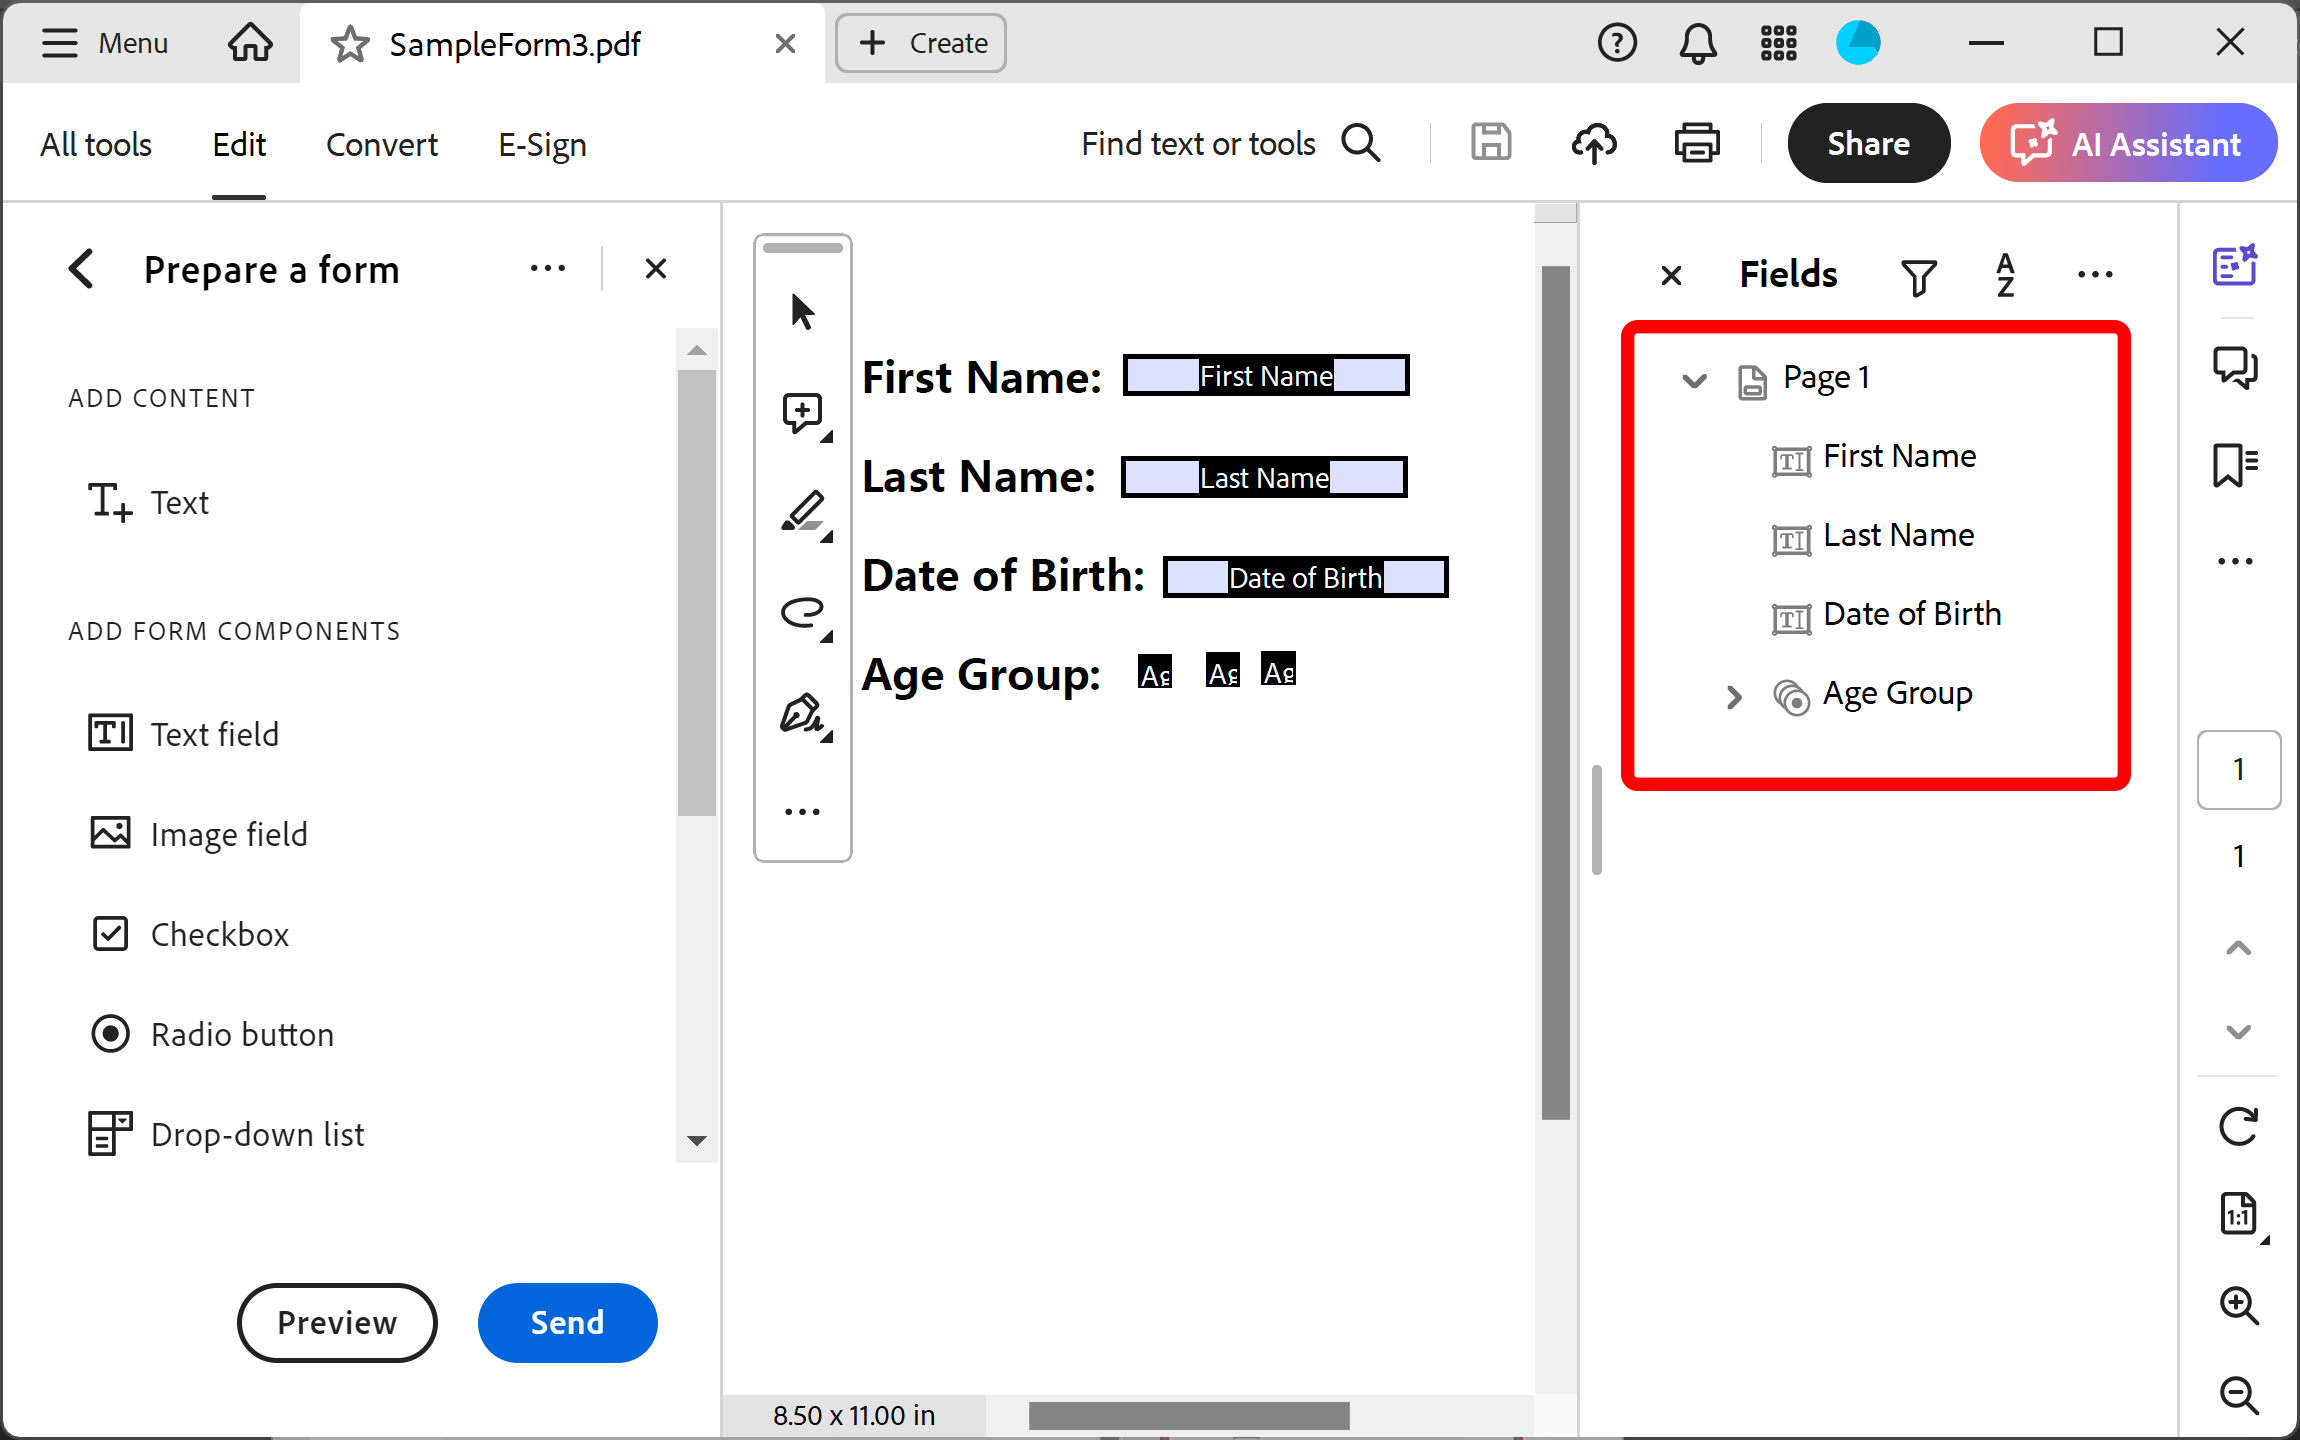 Fields list in the new interface